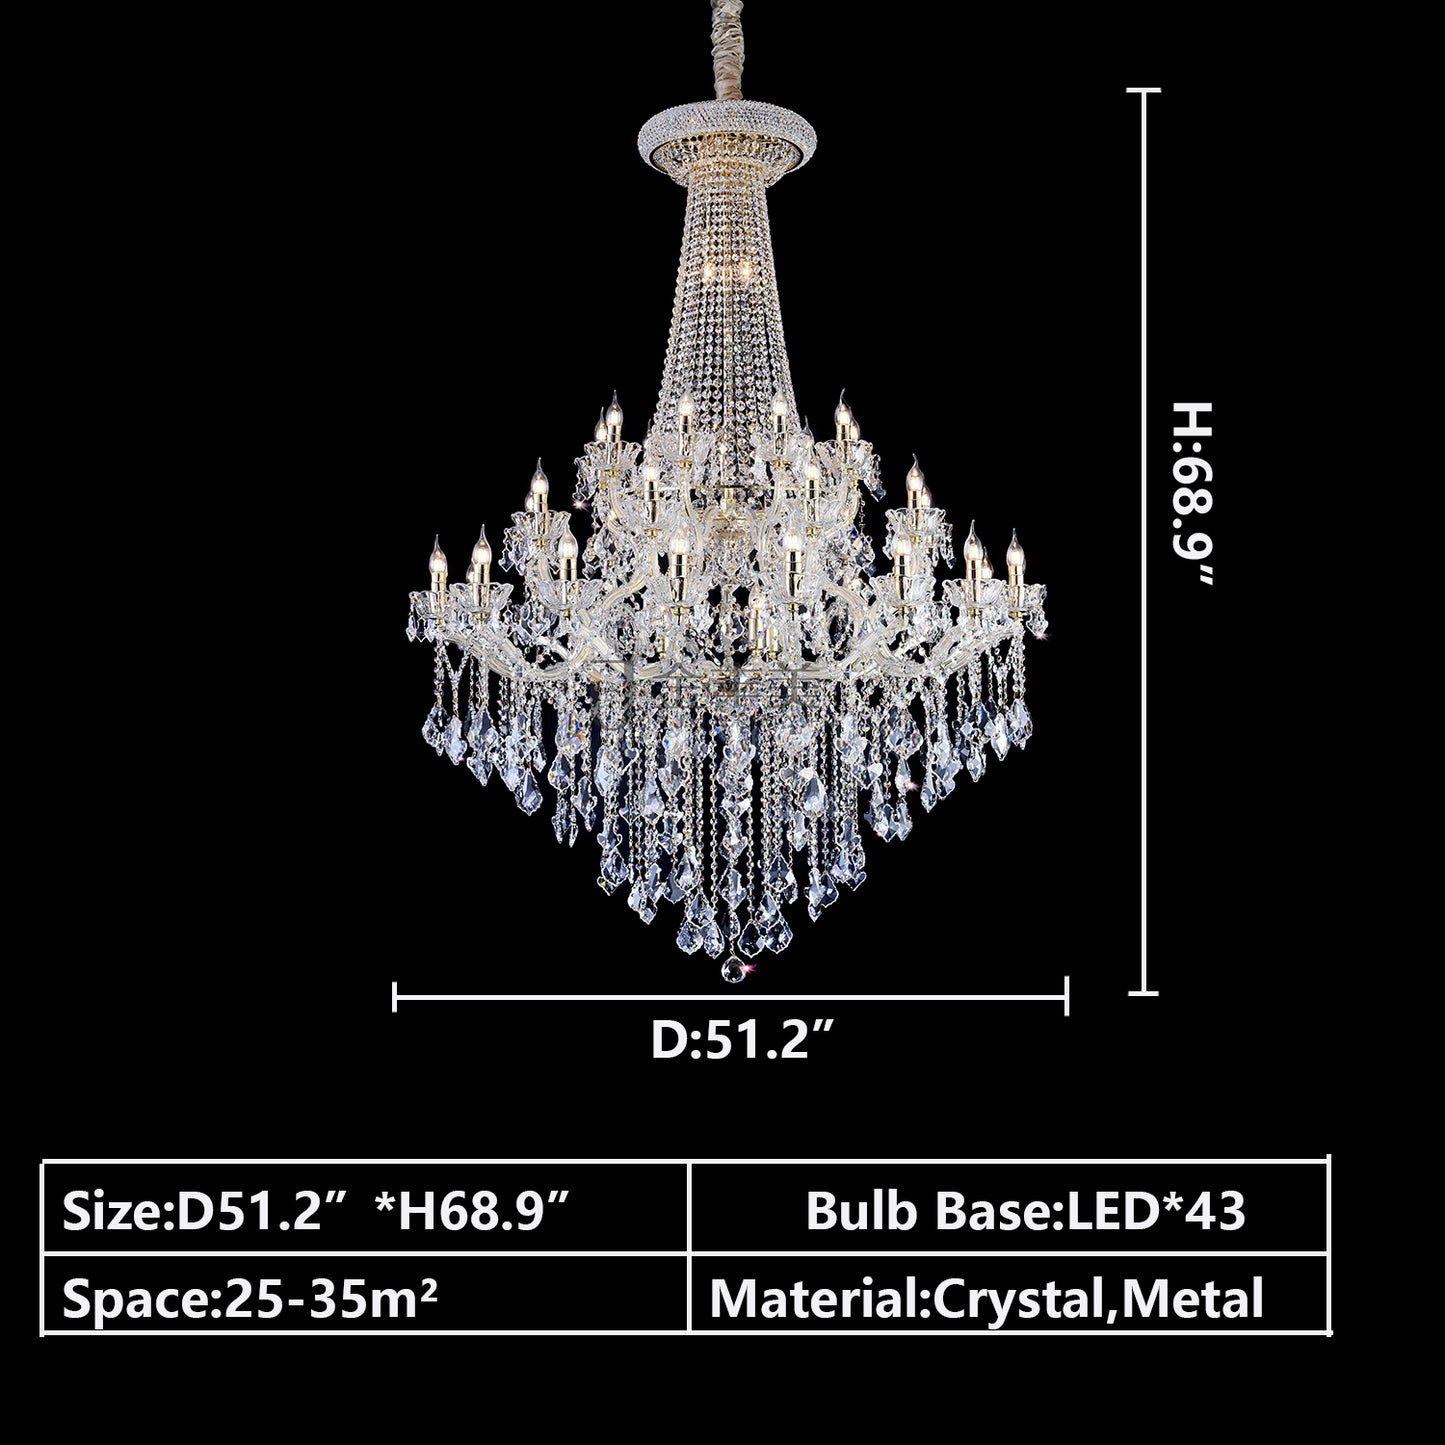 D51.2"*H68.9" chandelier,chandeliers,pendant,crystal,metal,clear crystal,candle,branch,round,raindrop,teardrop,extra large,oversized,large,huge,big,round,living room,luxury,dining room,modern,foyer,stairs,hallway,entrys,hotel lobby,duplex hall,loft